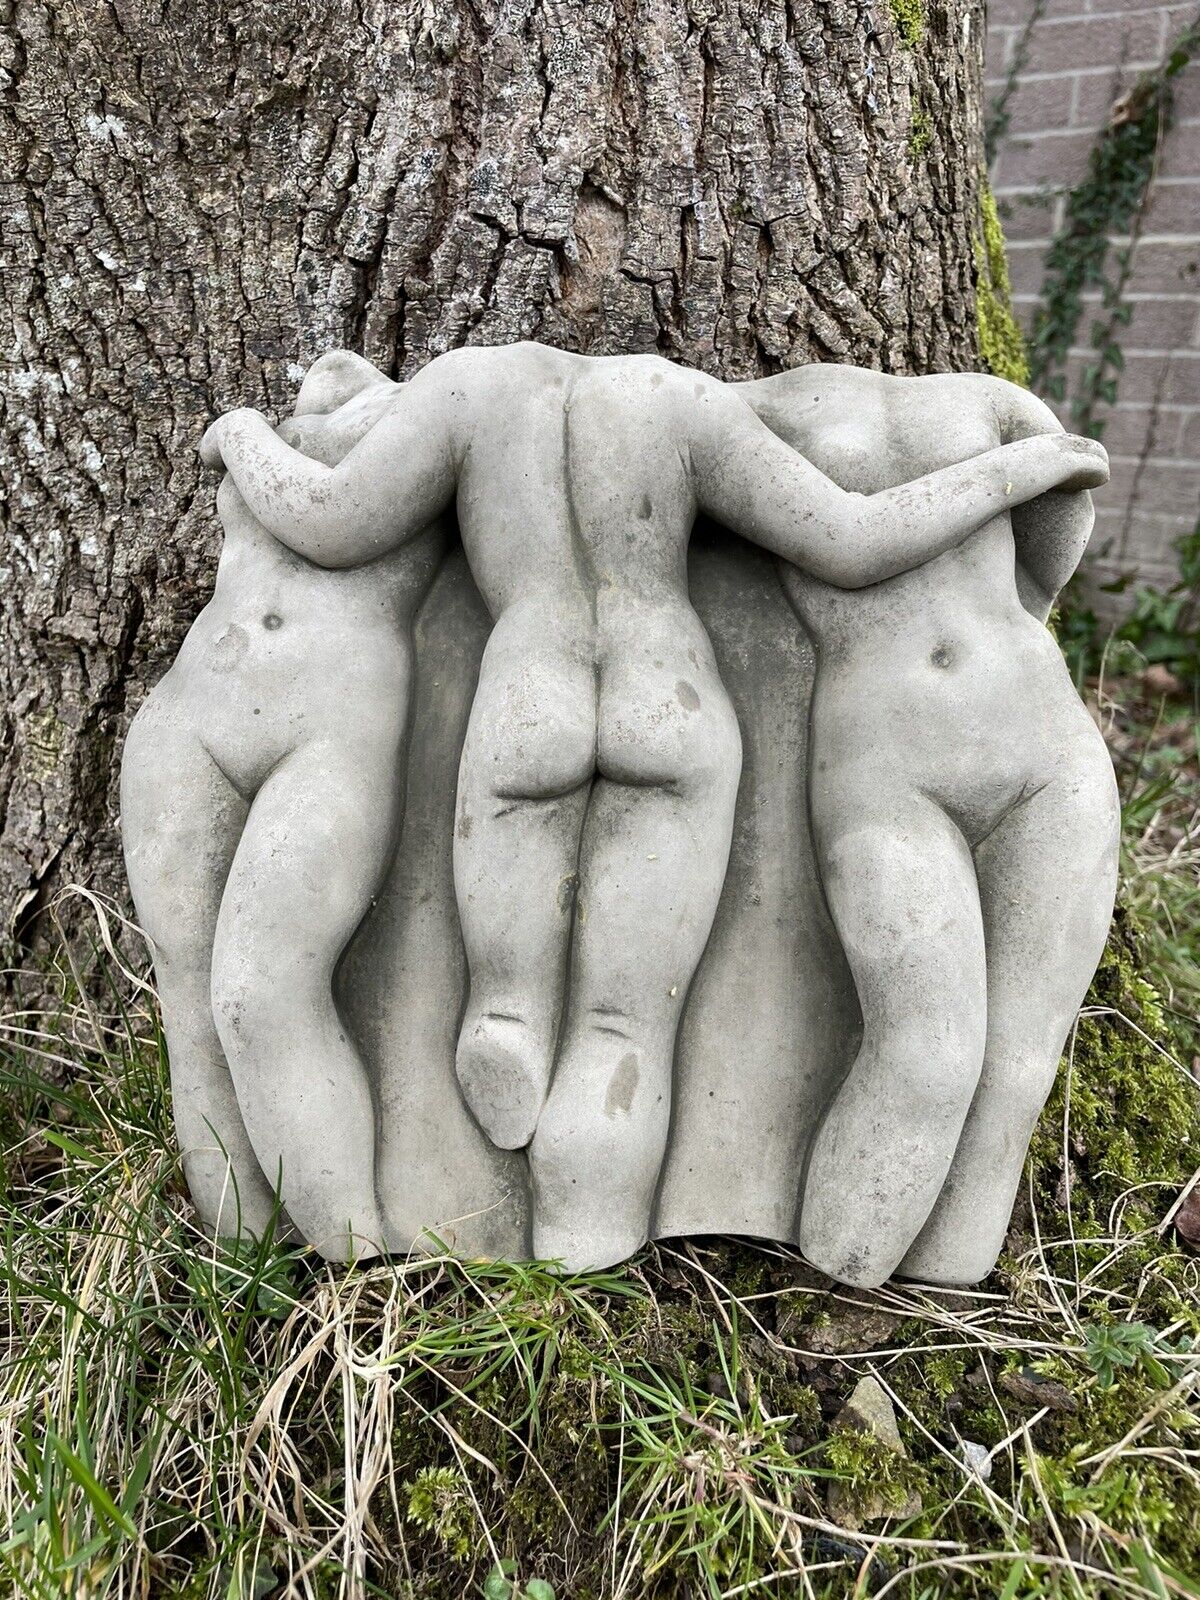 Three naked female figure of ancient Greek design situated amongst the grass of a British garden with tree in background